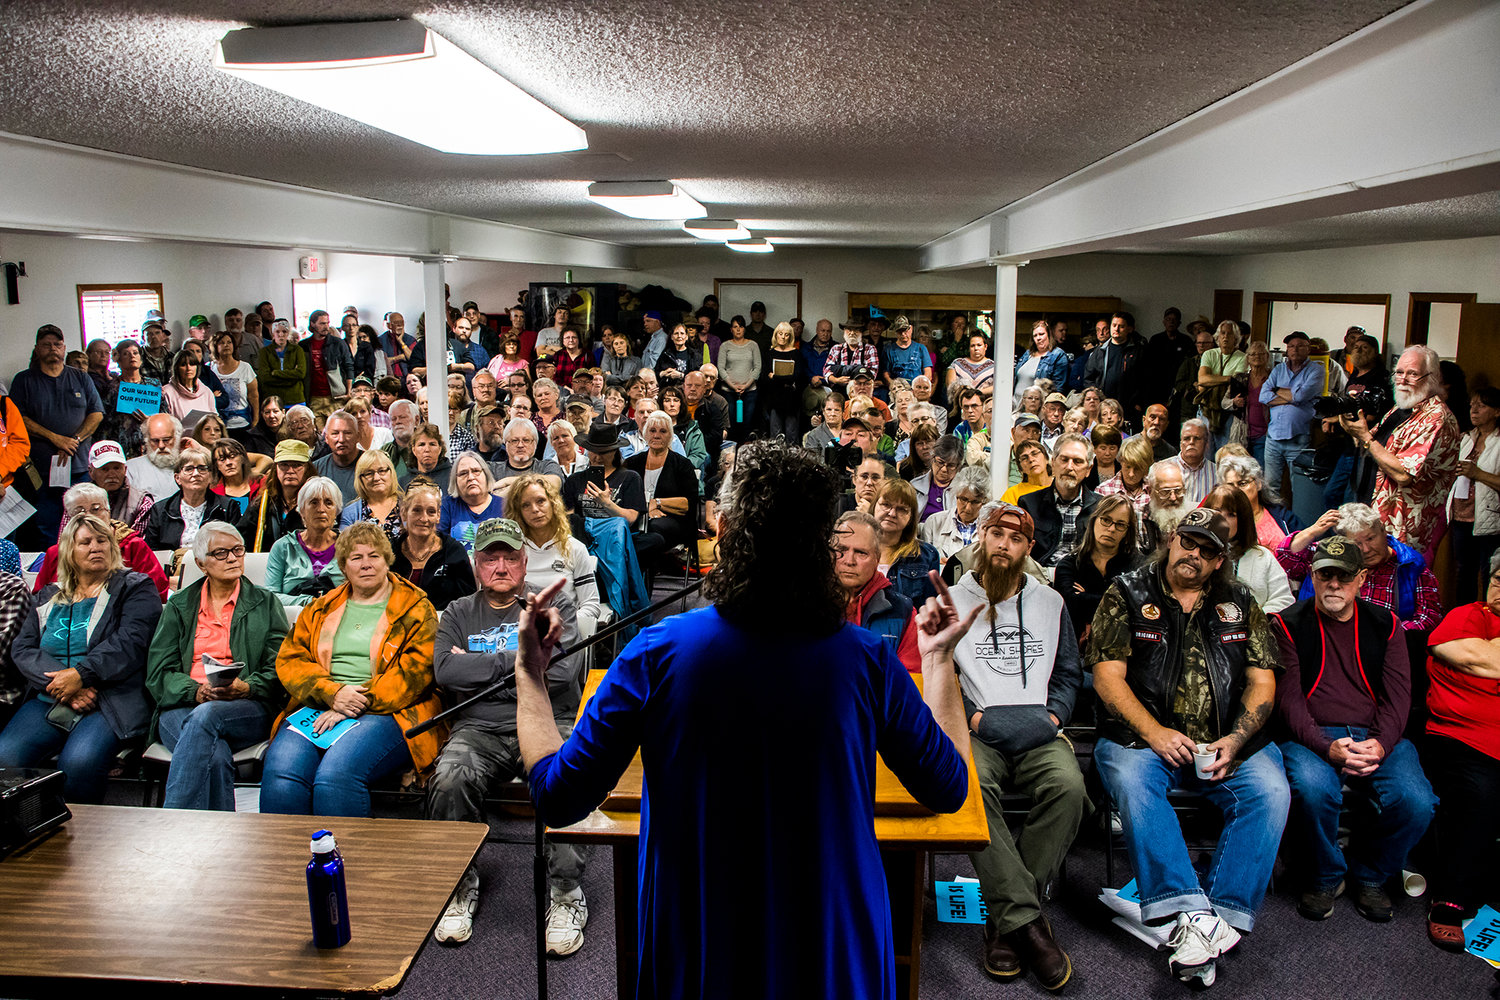 Former Cascade Locks, Oregon city councilor Deanna Busdieker addresses a packed town hall in Randle opposing a proposed water bottling plant. Budsieker helped lead opposition to a proposed plant in Cascade Locks.